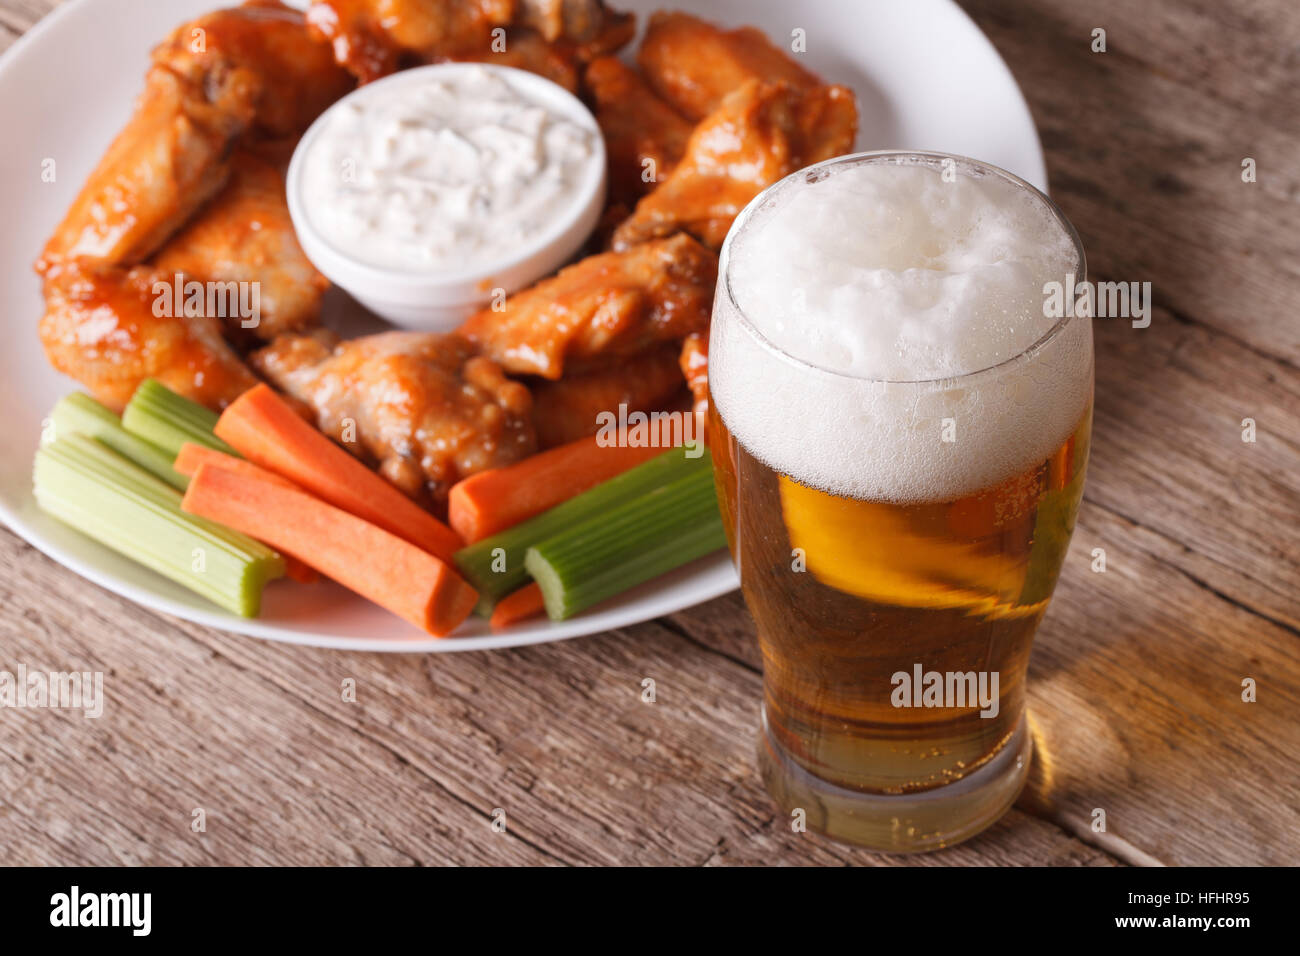 White Buffalo Bar High Resolution Stock Photography and Images - Alamy